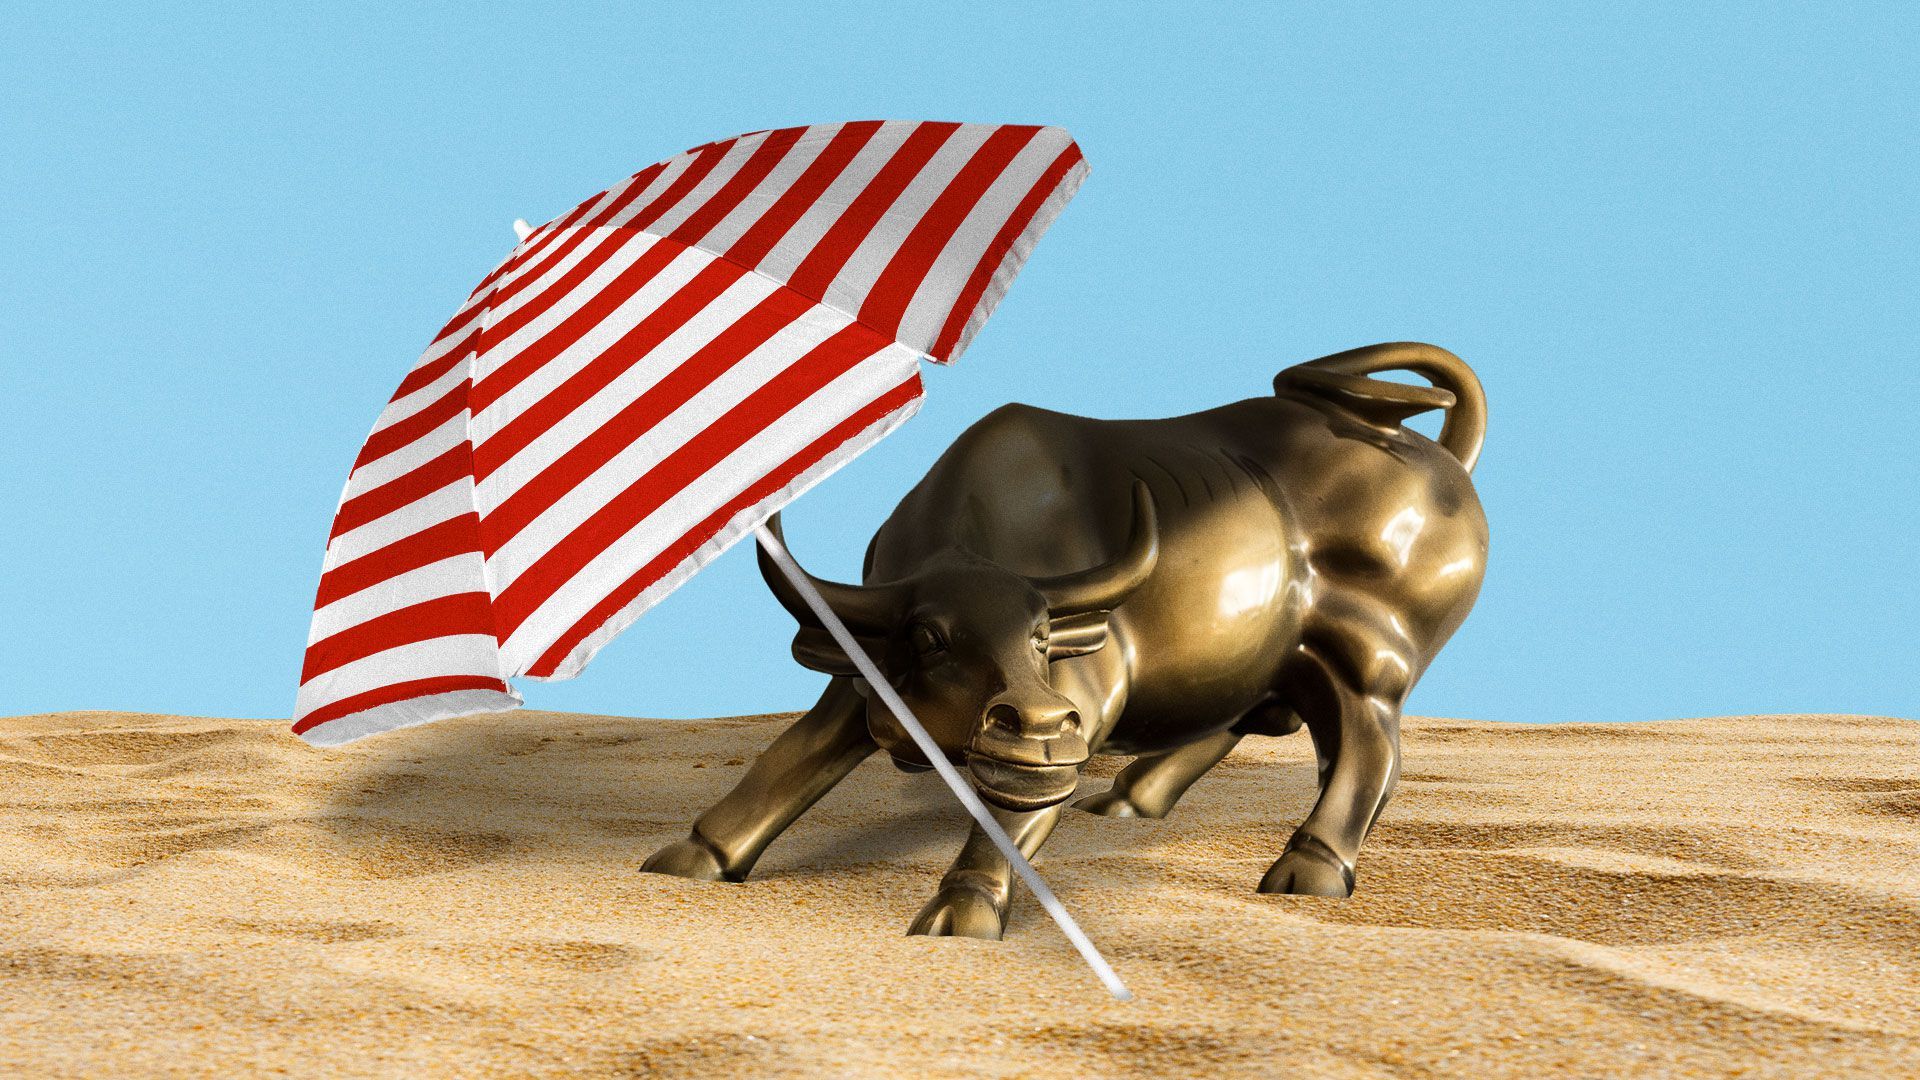 Illustration of Wall Street bull at a beach with a giant umbrella